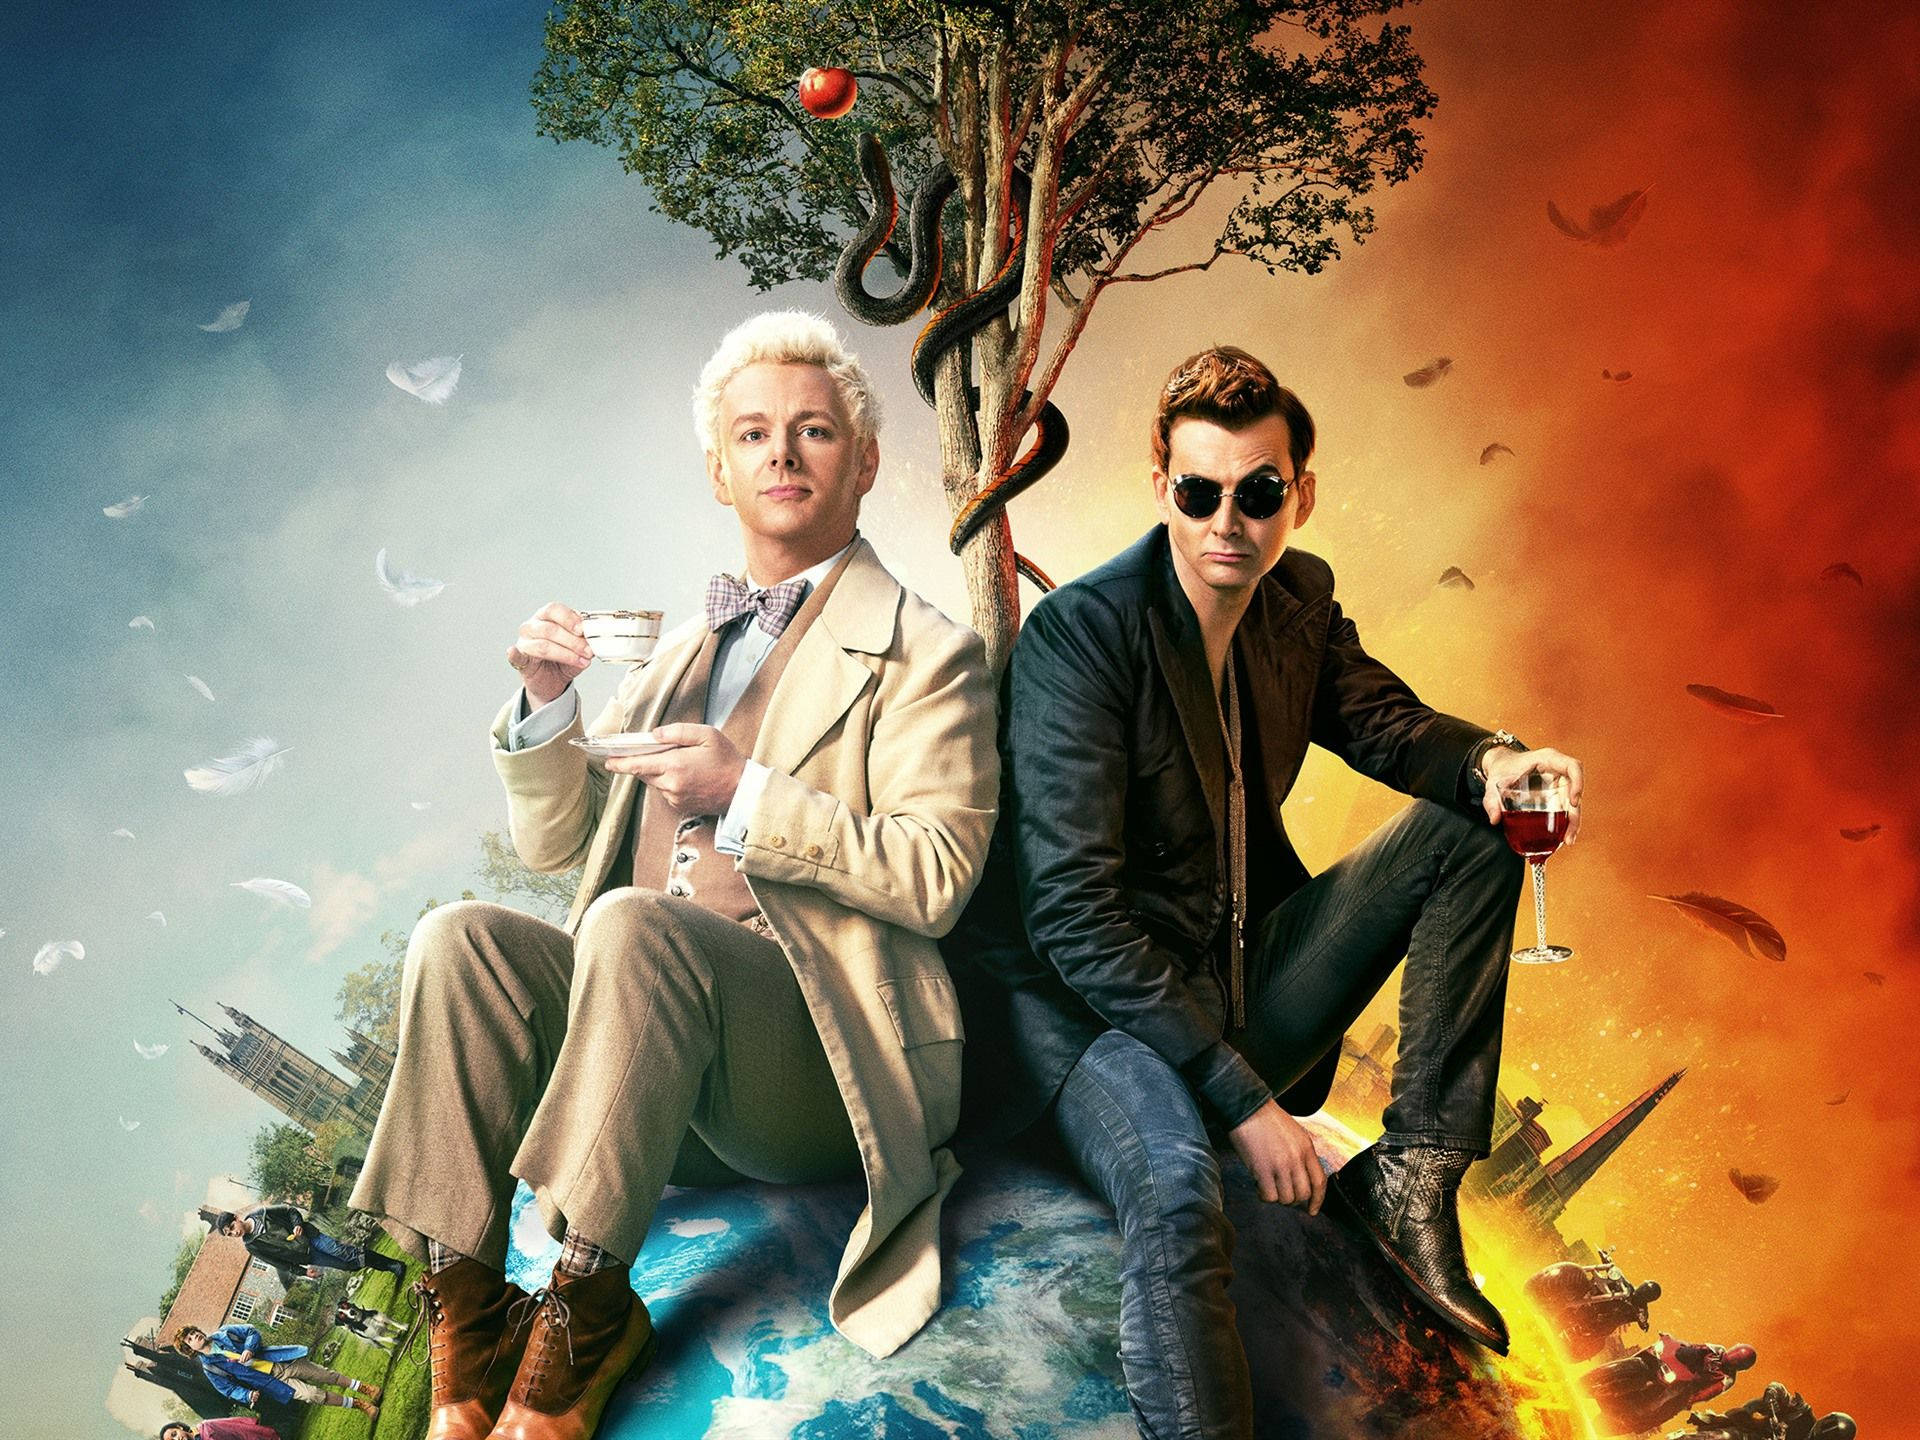 Top 999+ Good Omens Wallpaper Full HD, 4K✅Free to Use